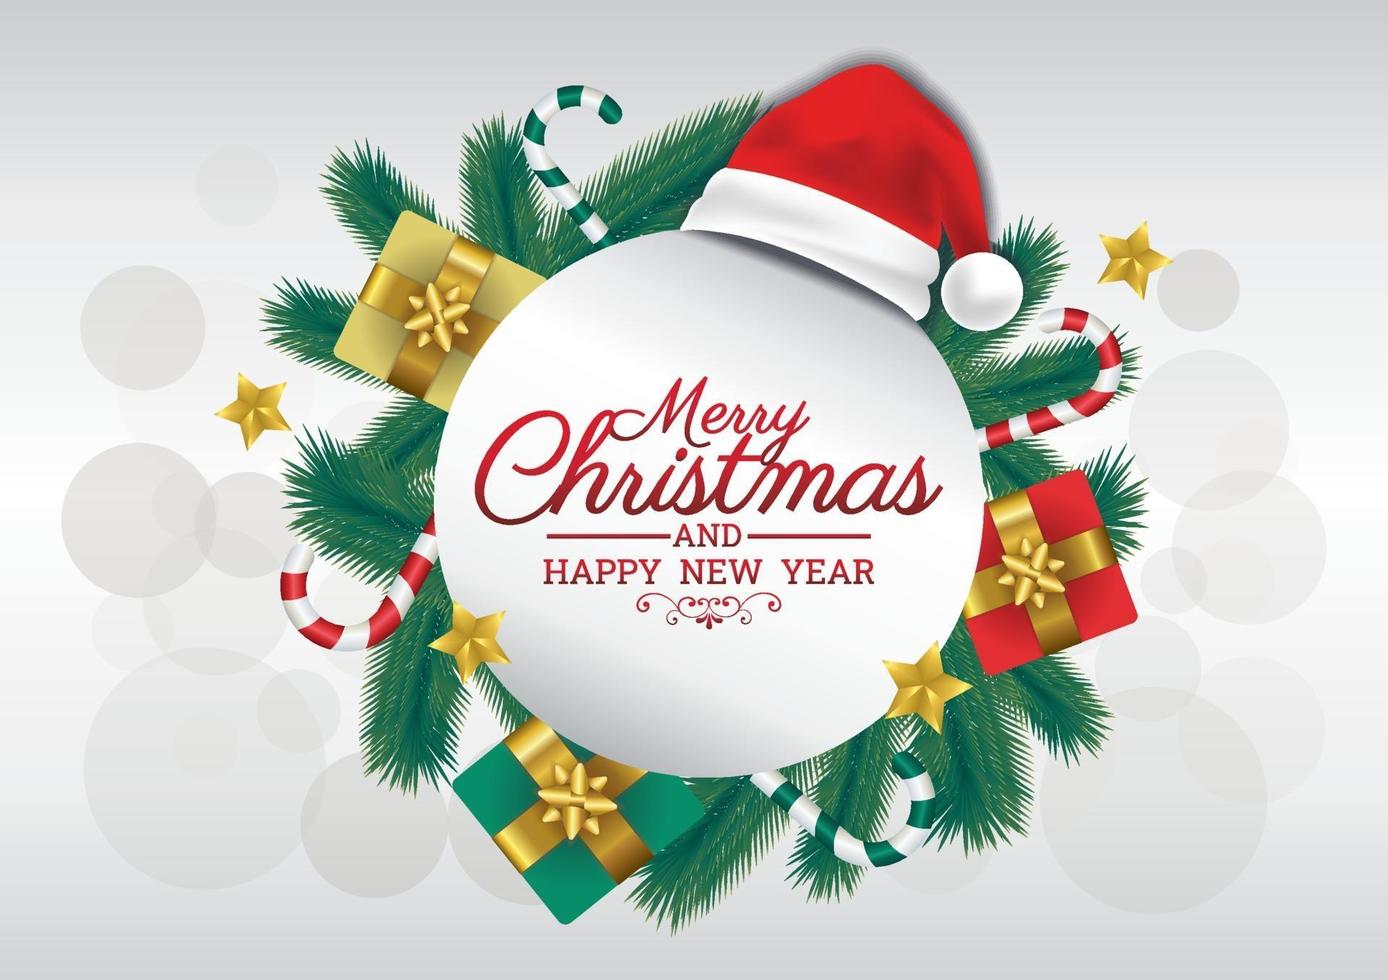 merry christmas art vector new year label